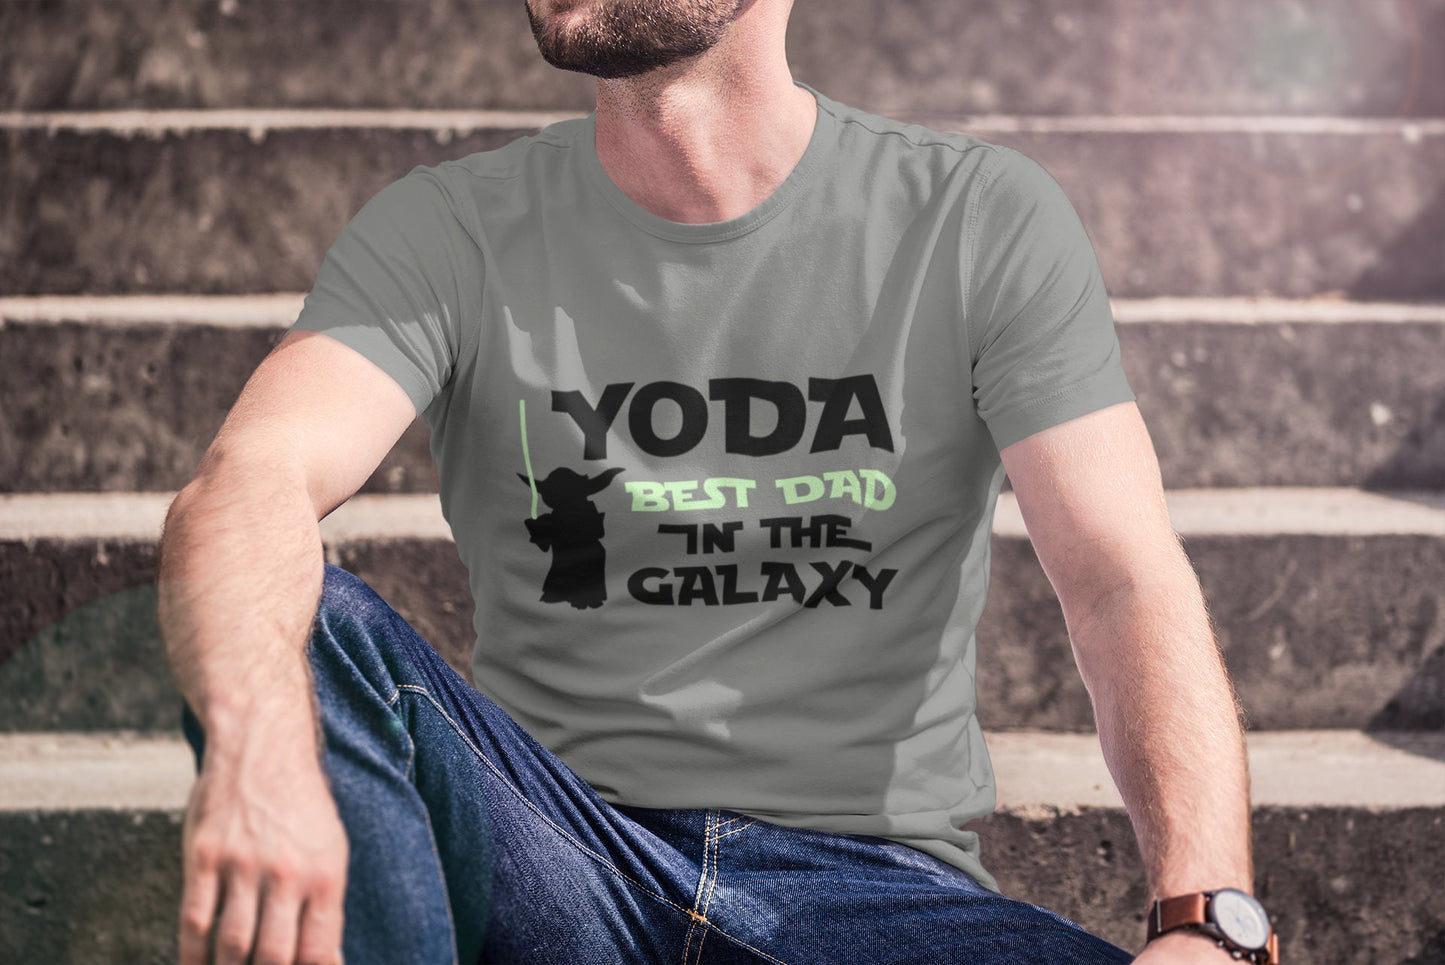 Yoda Best Dad in the Galaxy - Star Wars themed Father's Day shirt